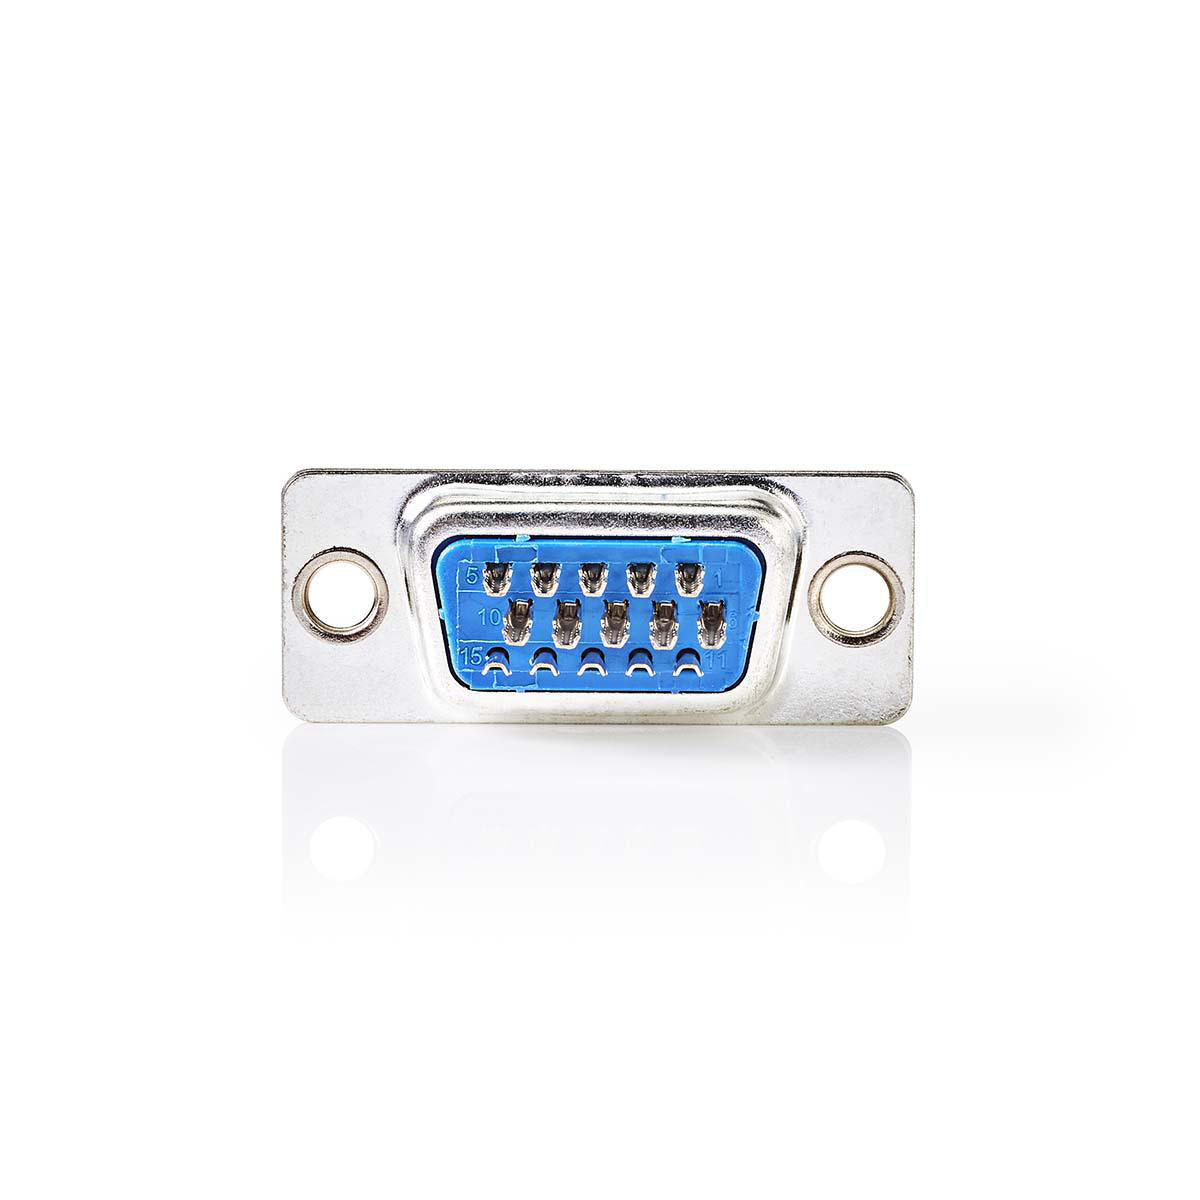 D-Sub High Density Pluggable Connector | VGA male | Metal ND1712 